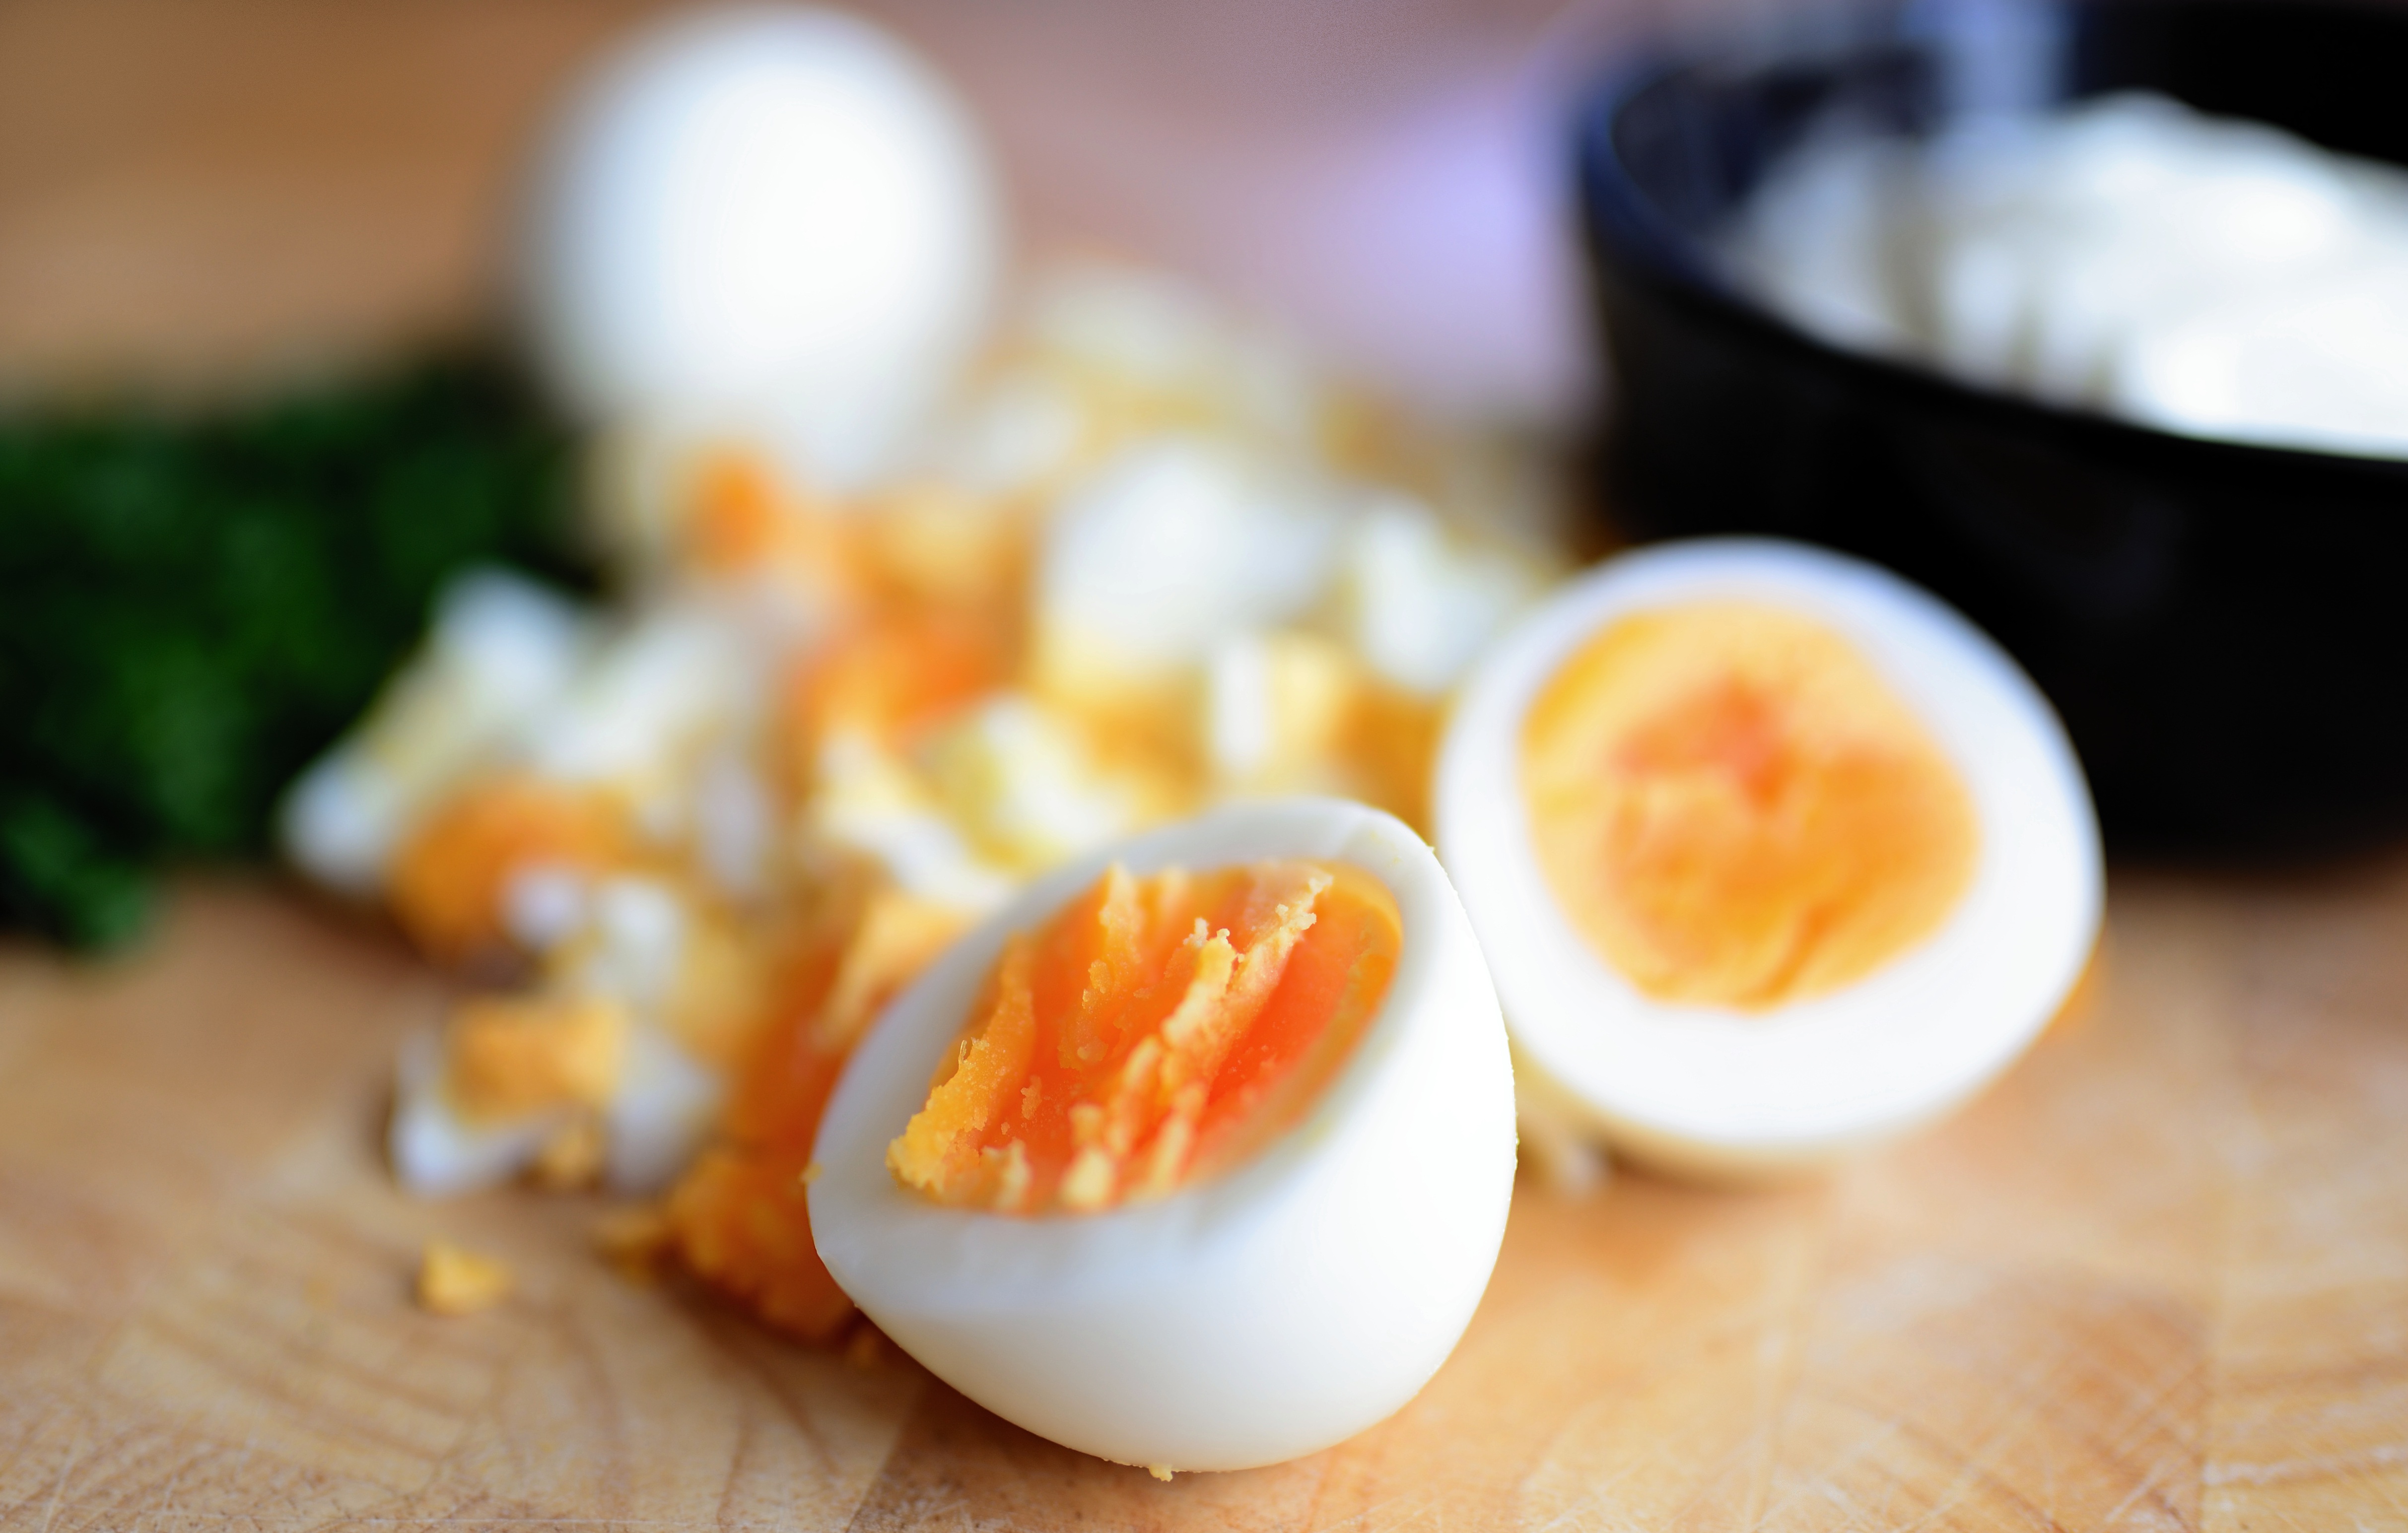 The lipid content of content of egg yolks is around 60%